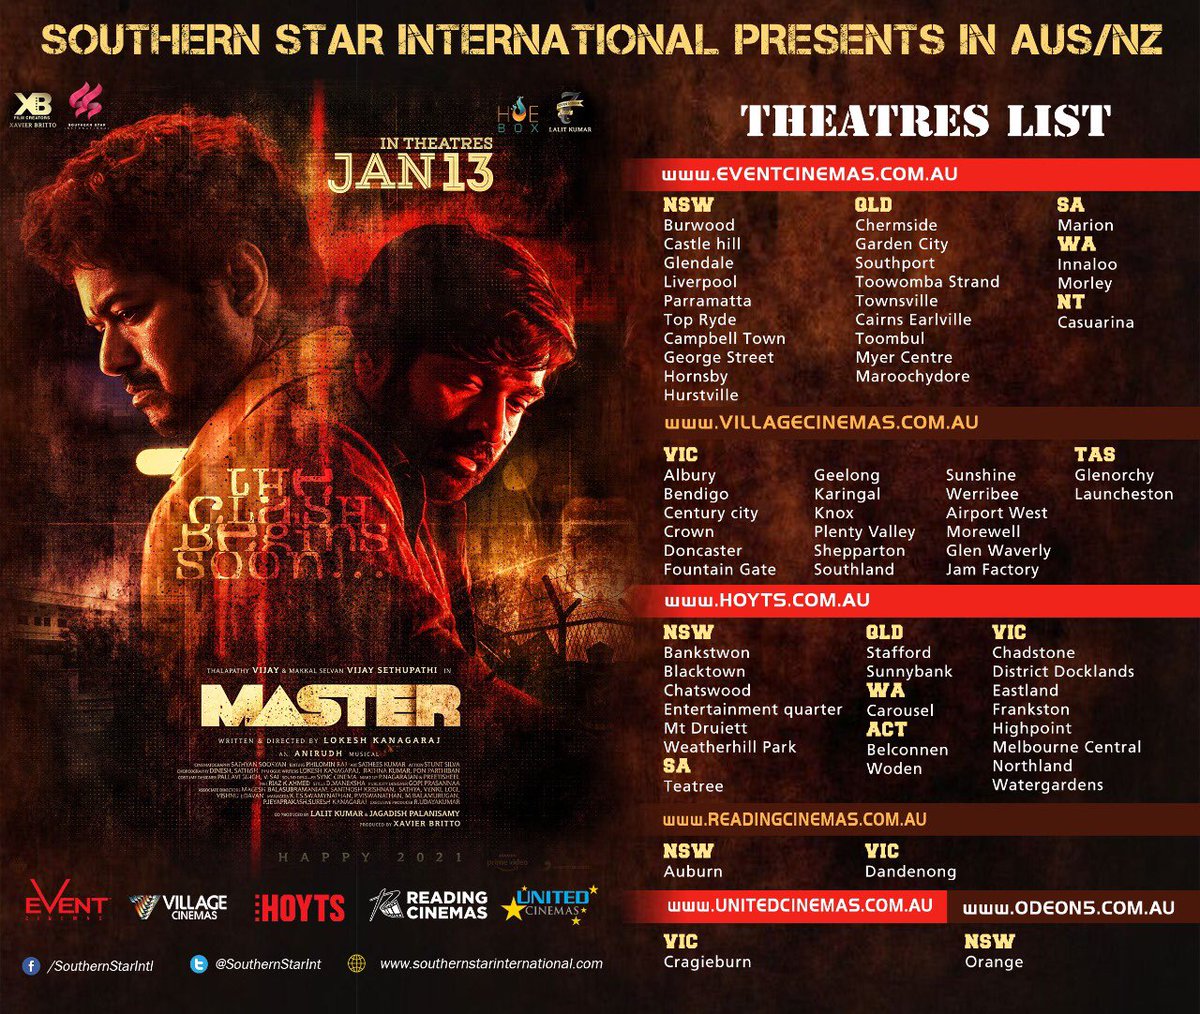 #Masterfilm will be the Biggest ever Release for a Kollywood film in Australia. Official #Master Australia location list!Advance bookings will open from Monday midnight. Release by @SouthernStarInt 🤜🤛 @actorvijay @Dir_Lokesh @MrRathna @Jagadishbliss @MasterMovieOff